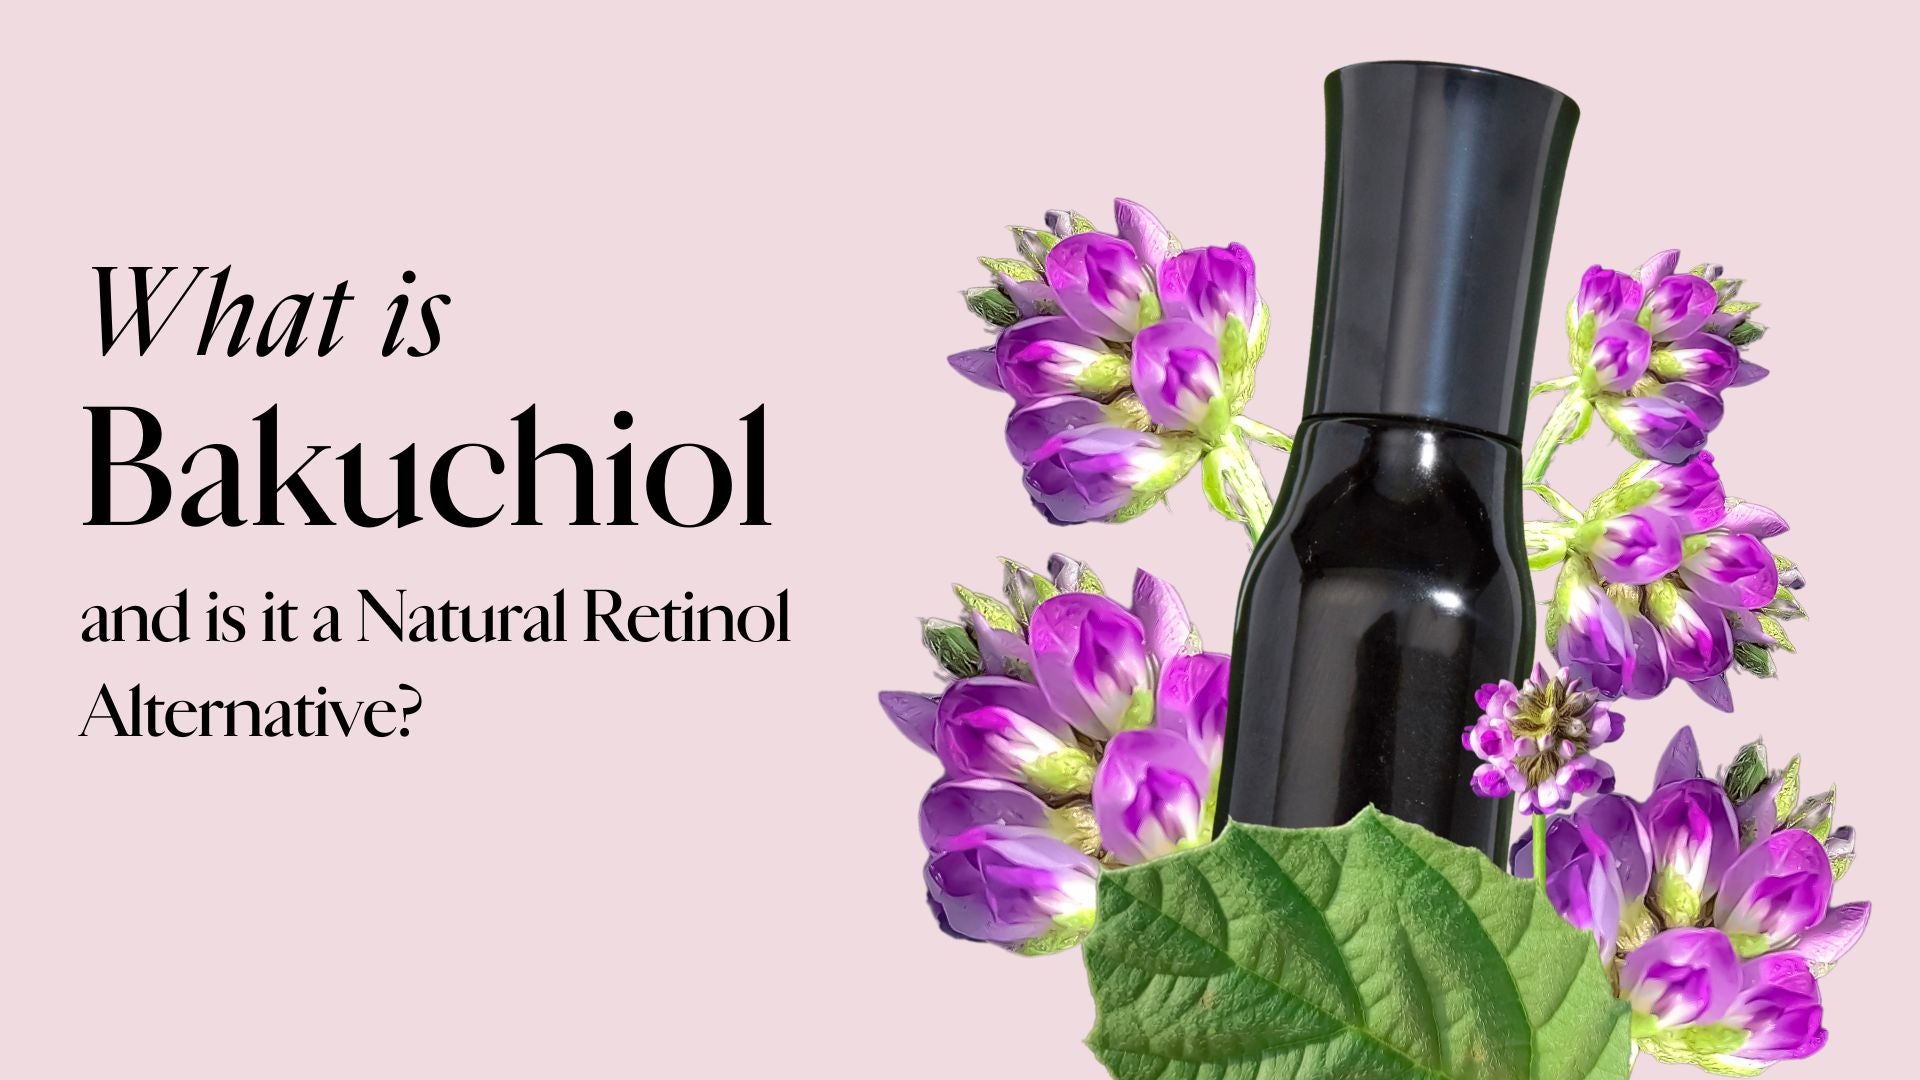 What is Bakuchiol and is it a Natural Retinol Alternative?